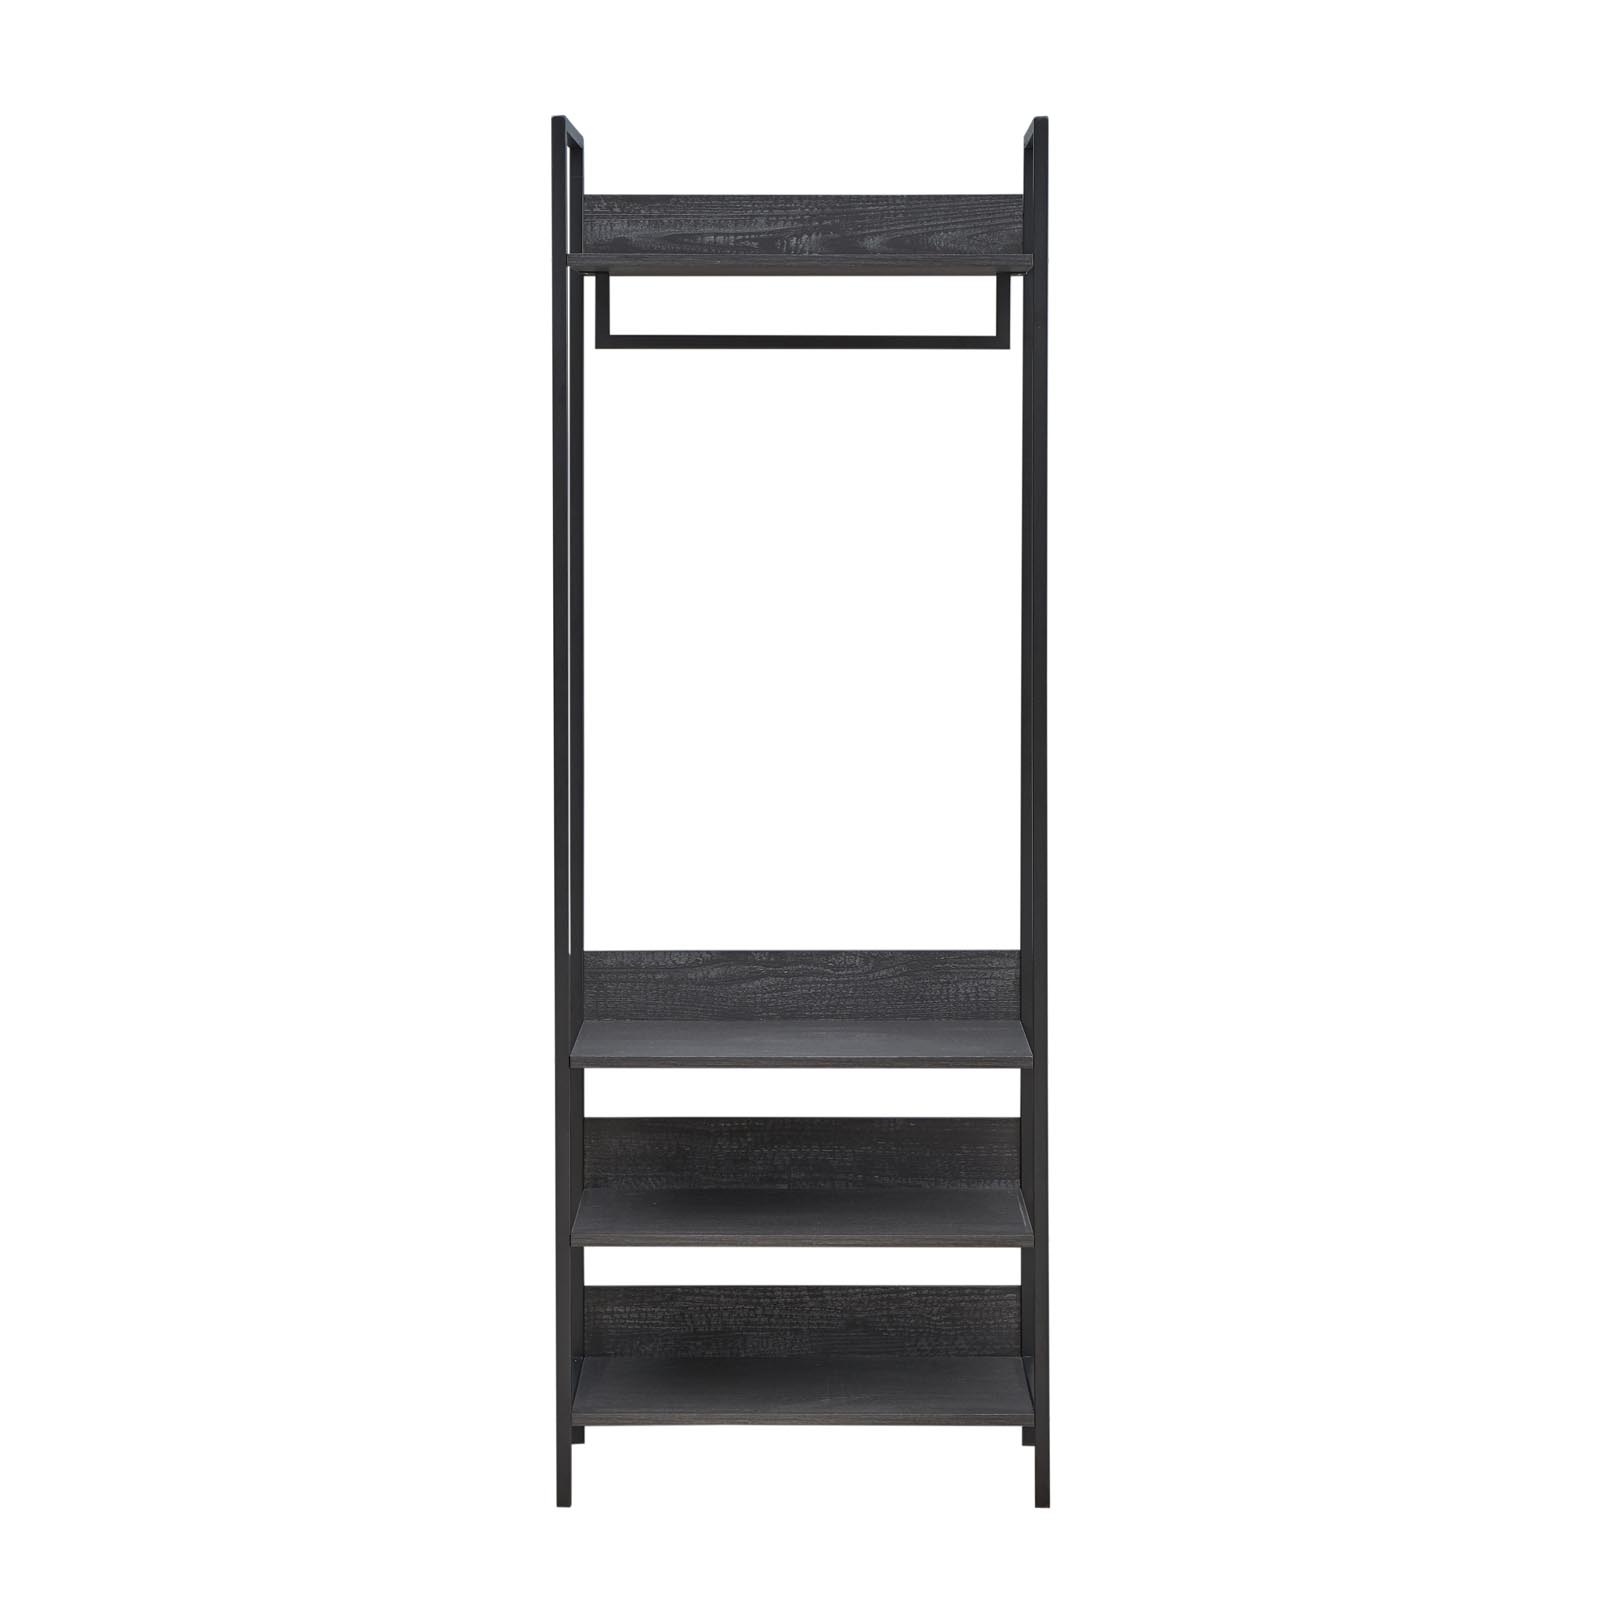 Zahra Open Wardrobe with 4 Shelves in Black - Home Supplier